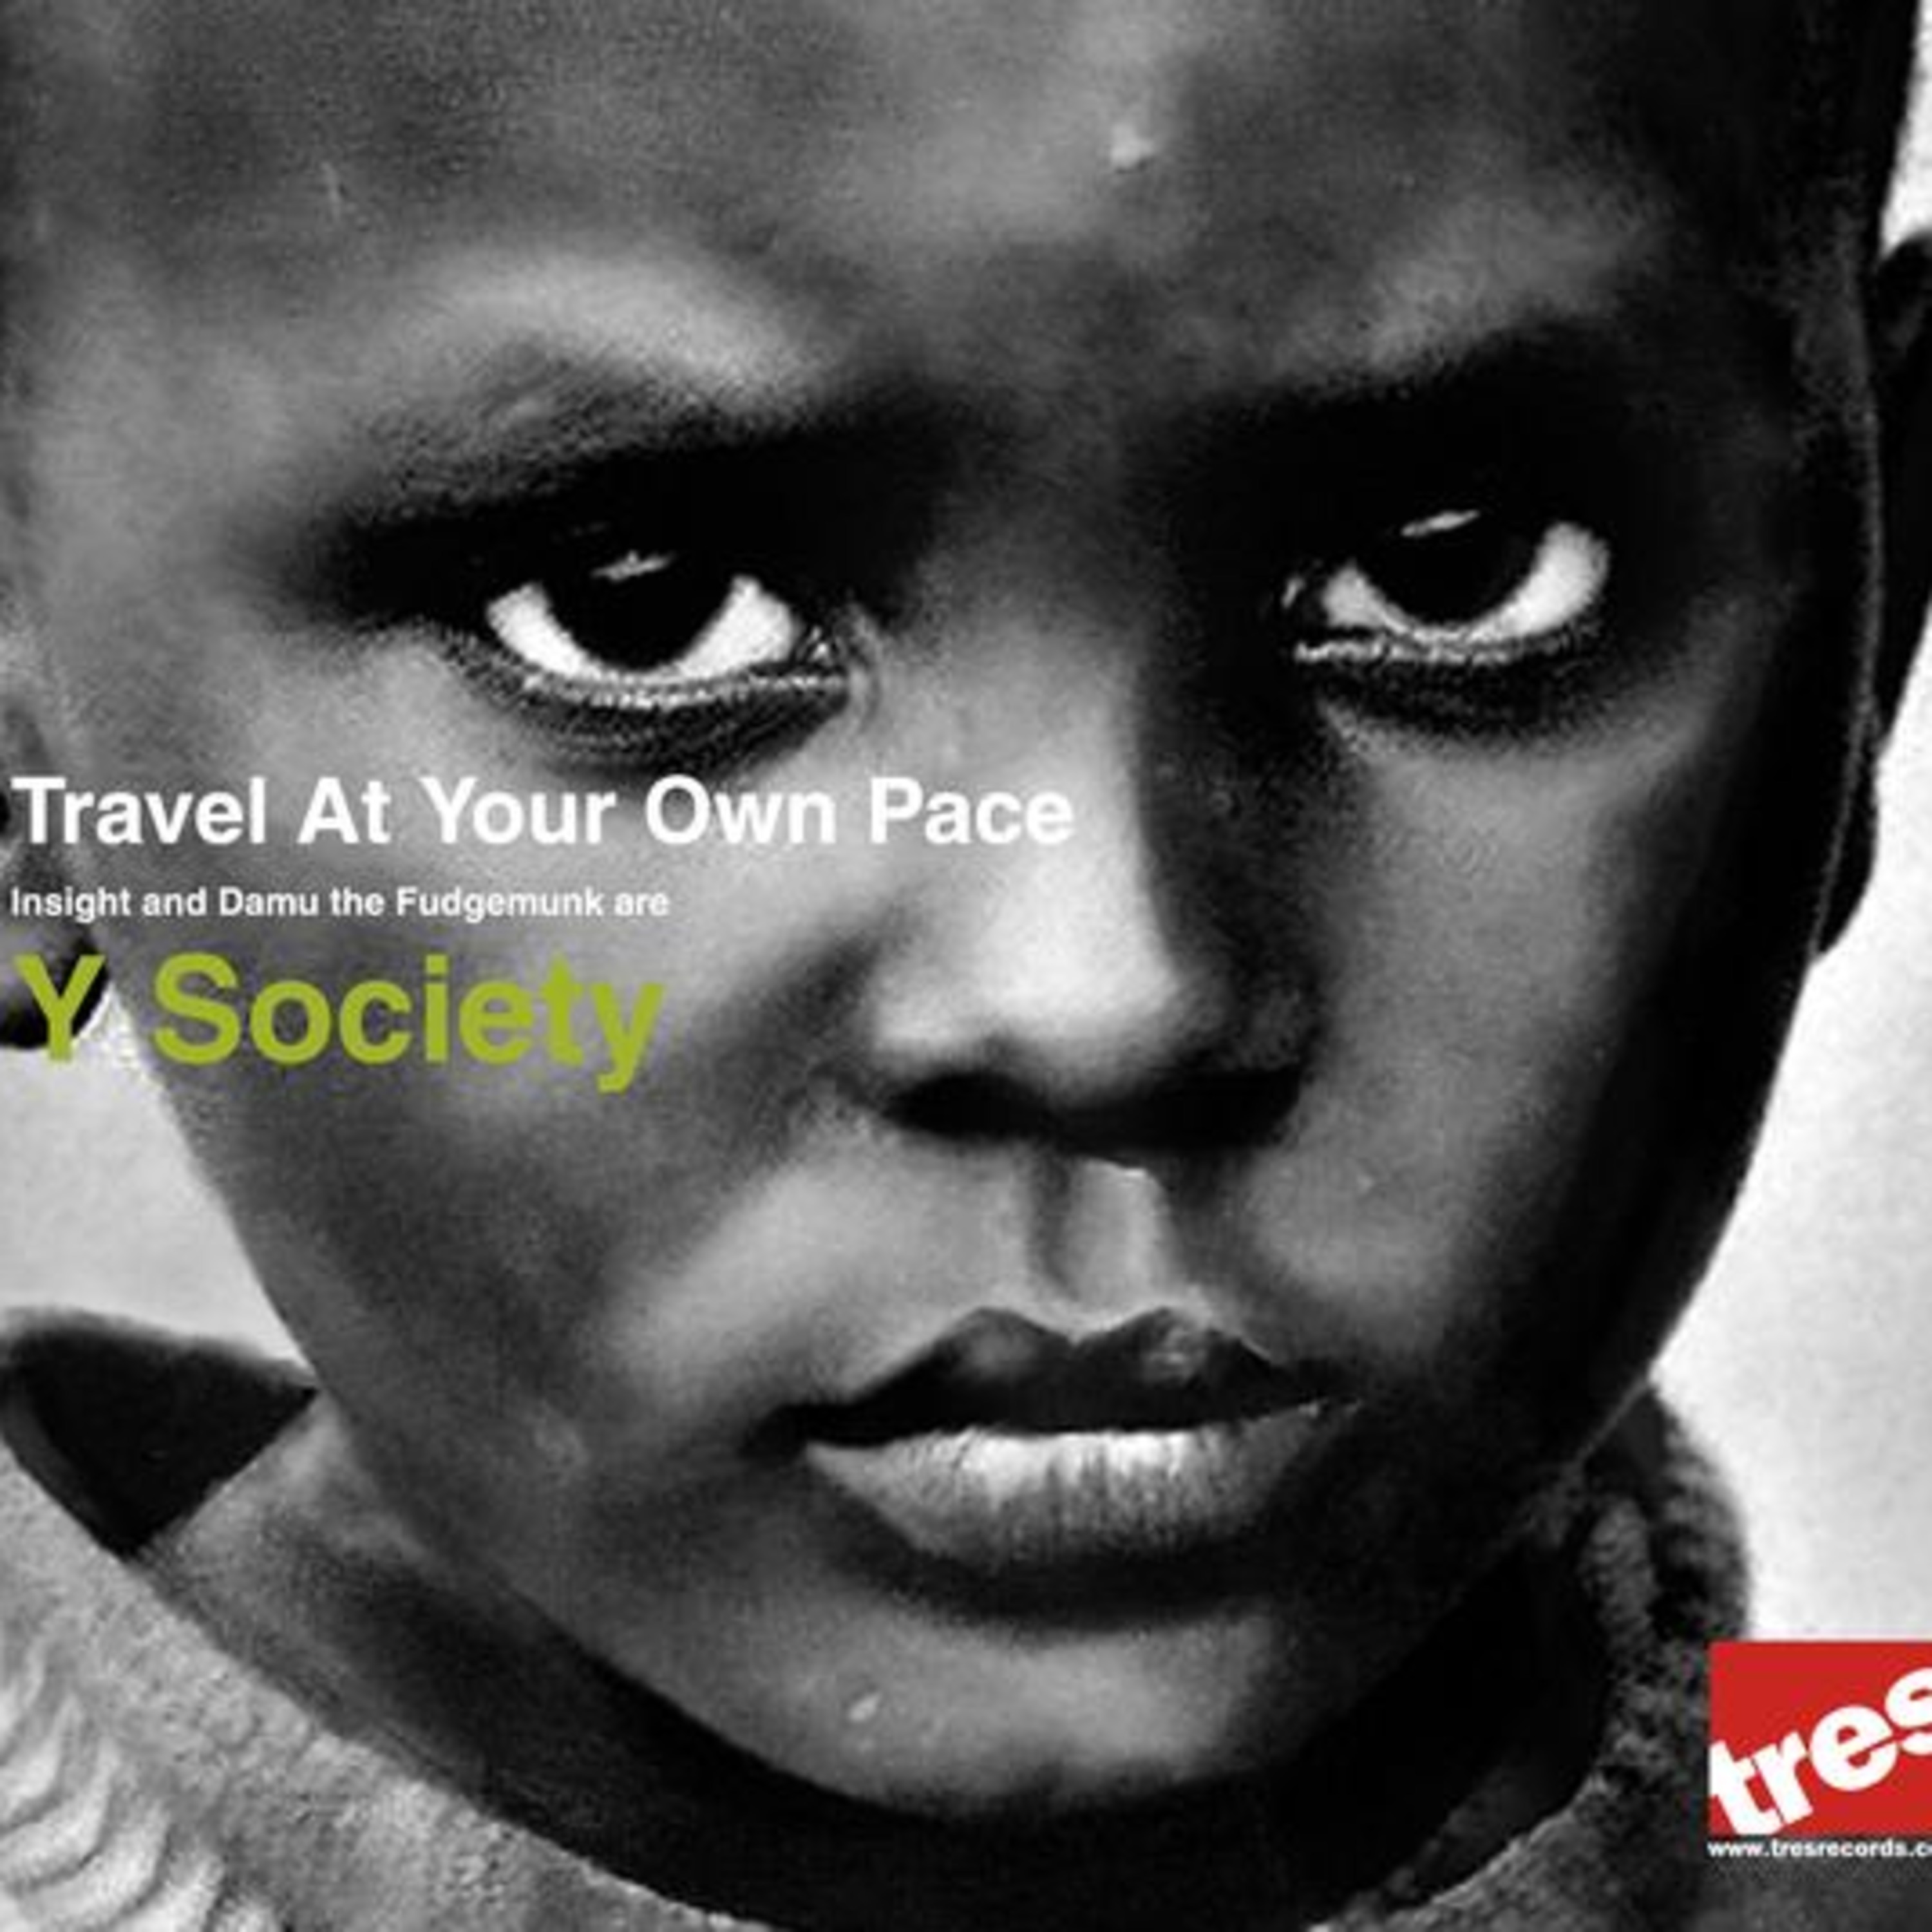 Y society. Travel at your own Pace y Society. Damu the Fudgemunk. Damu the Fudgemunk Akai. Damu the Fudgemunk Cover Art.